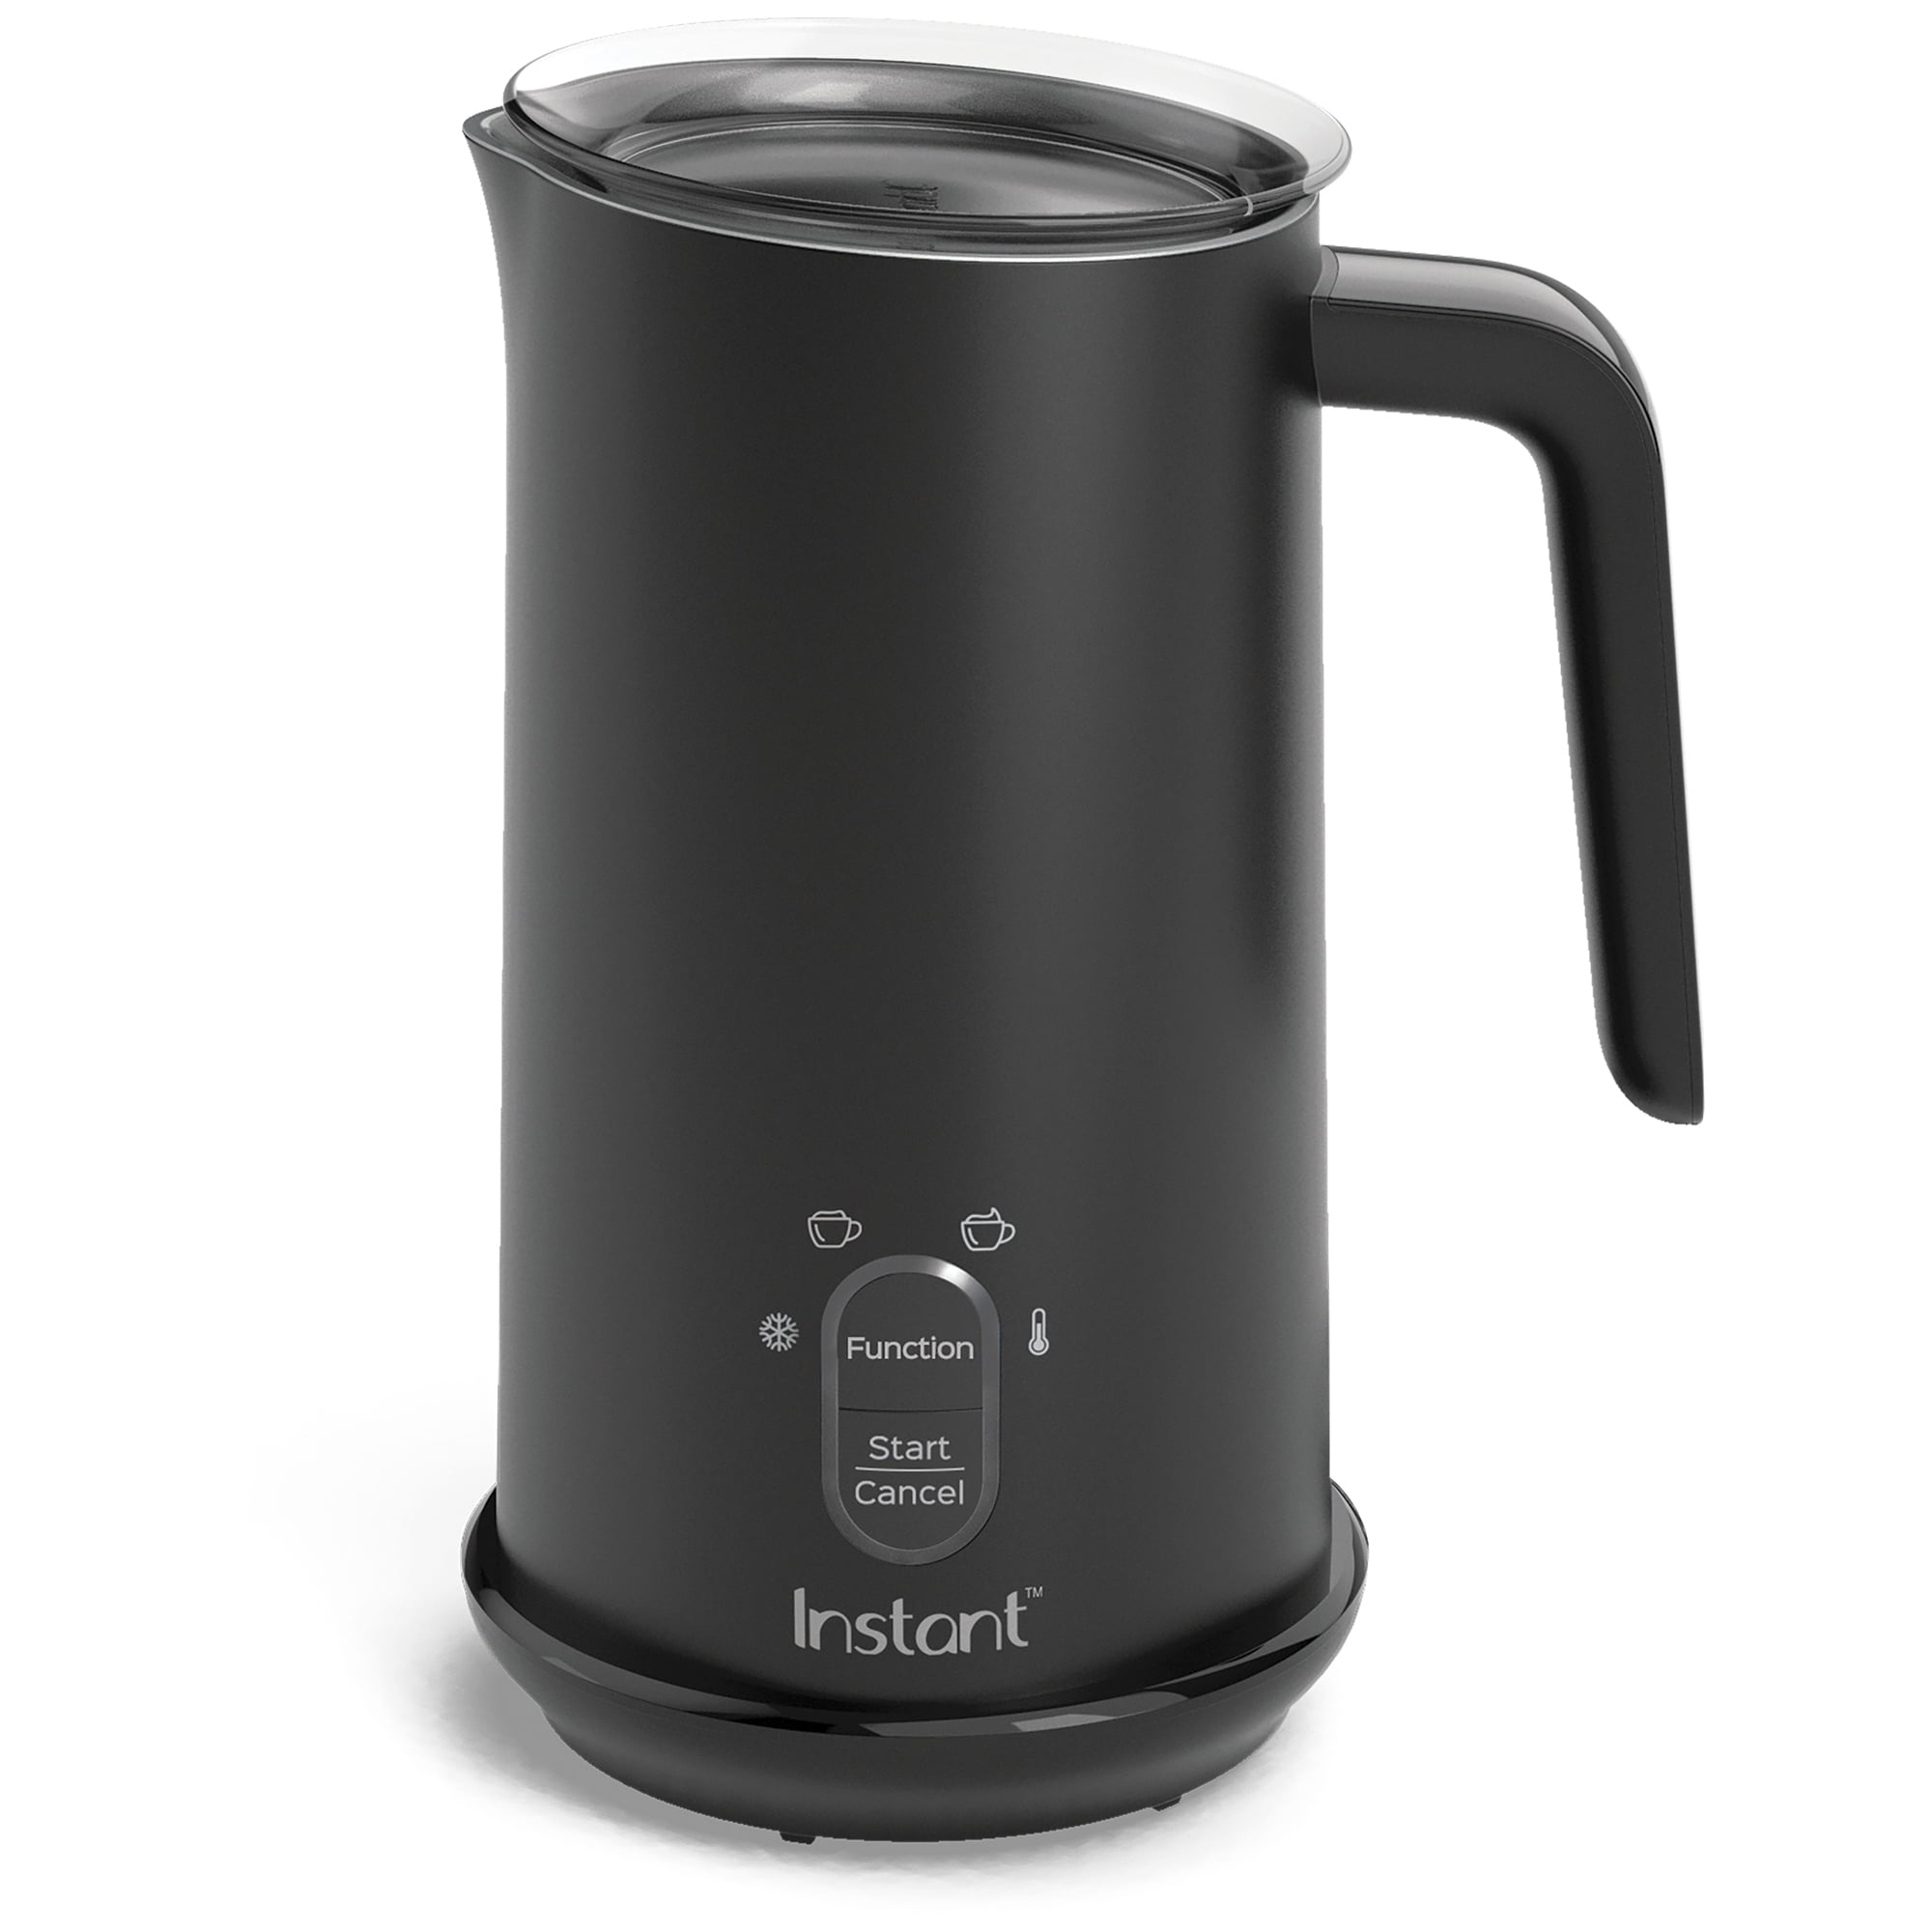  Instant Pot Milk Frother, 4-in-1 Electric Milk Steamer,  10oz/295ml Automatic Hot and Cold Foam Maker and Milk Warmer for Latte,  Cappuccinos, Macchiato, From the Makers of Instant 500W, Black: Home 